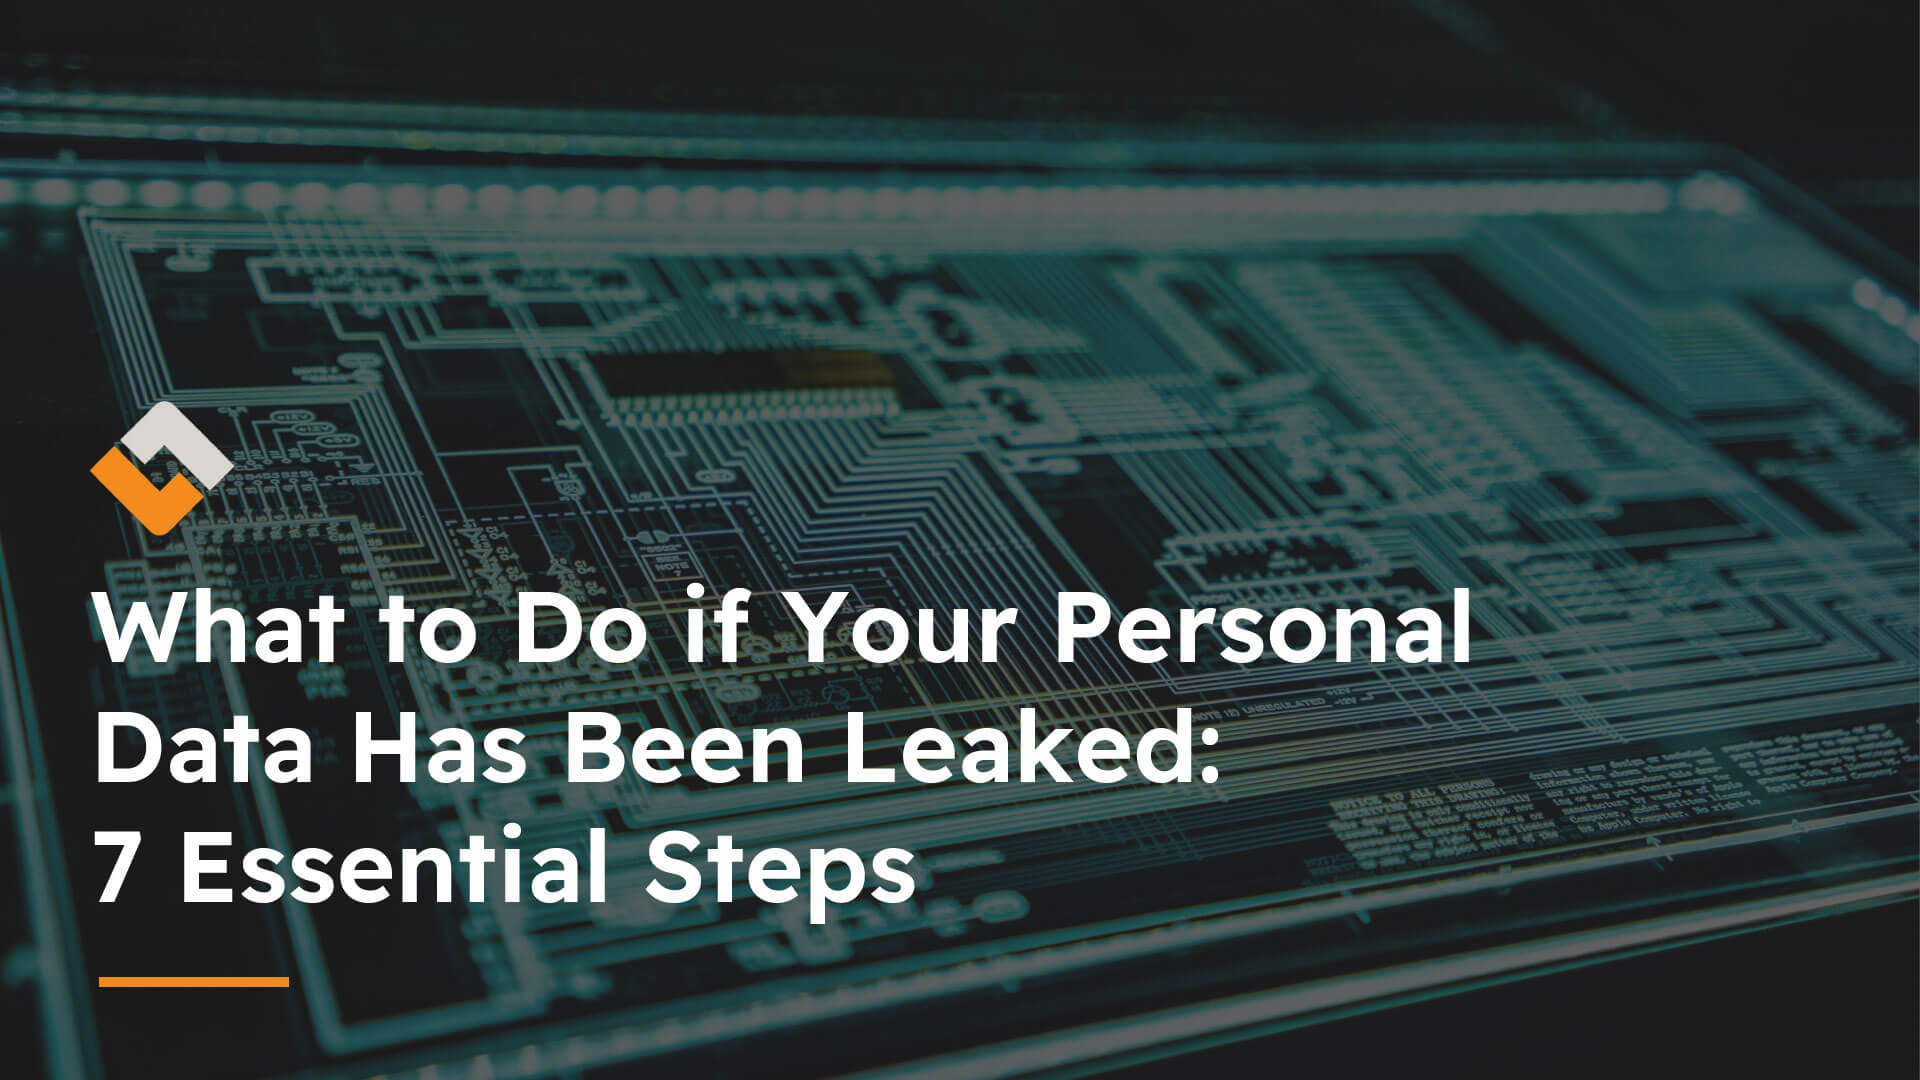 What to Do if Your Personal Data Has Been Leaked: 7 Essential Steps